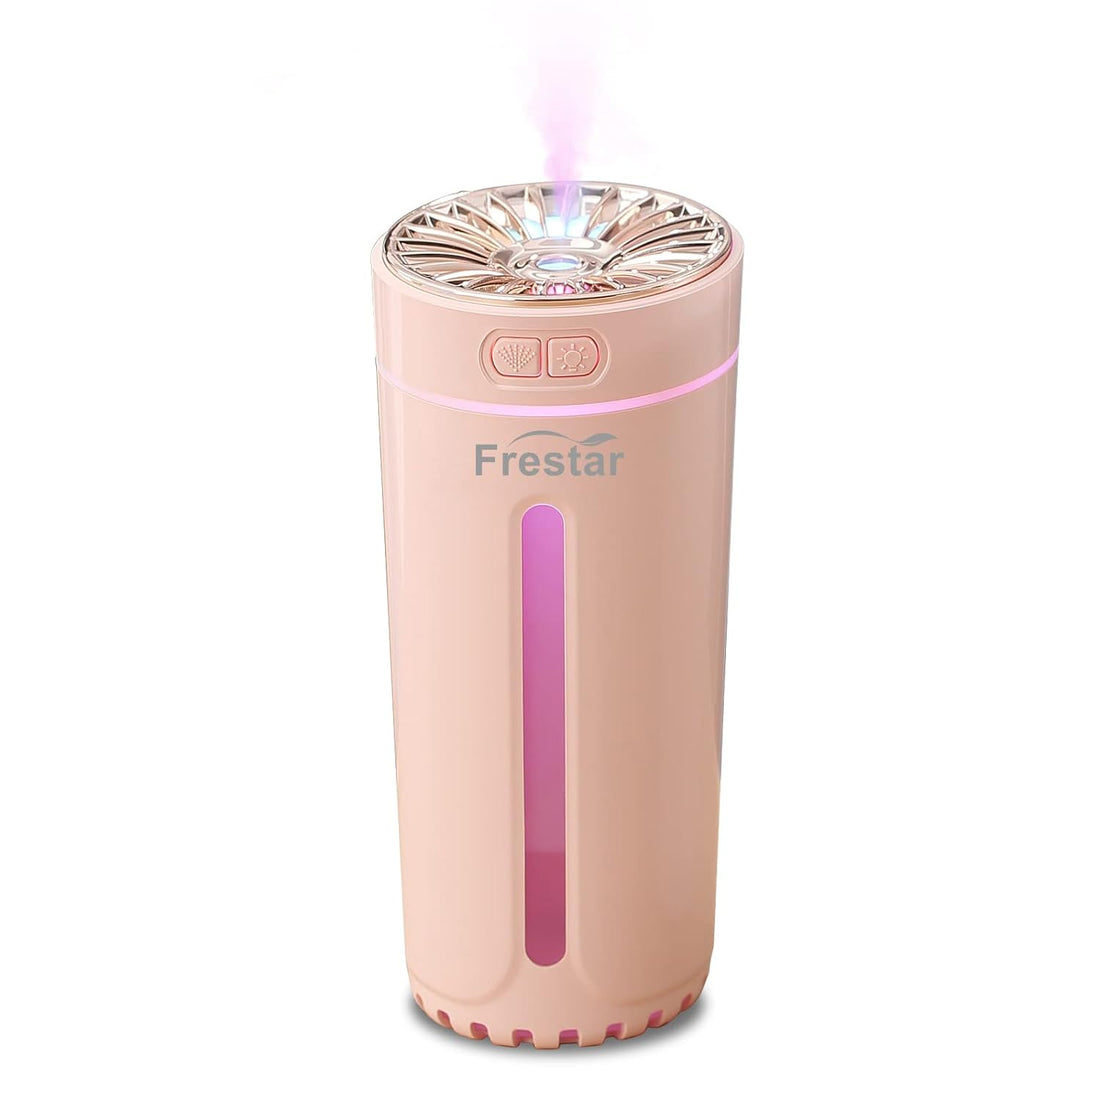 Small USB Desktop Humidifier 300ml with 7 Colors LED Light for Home, Plant, Car, Office, Bedroom,Baby with Nano Mist and No Battery (Pink)